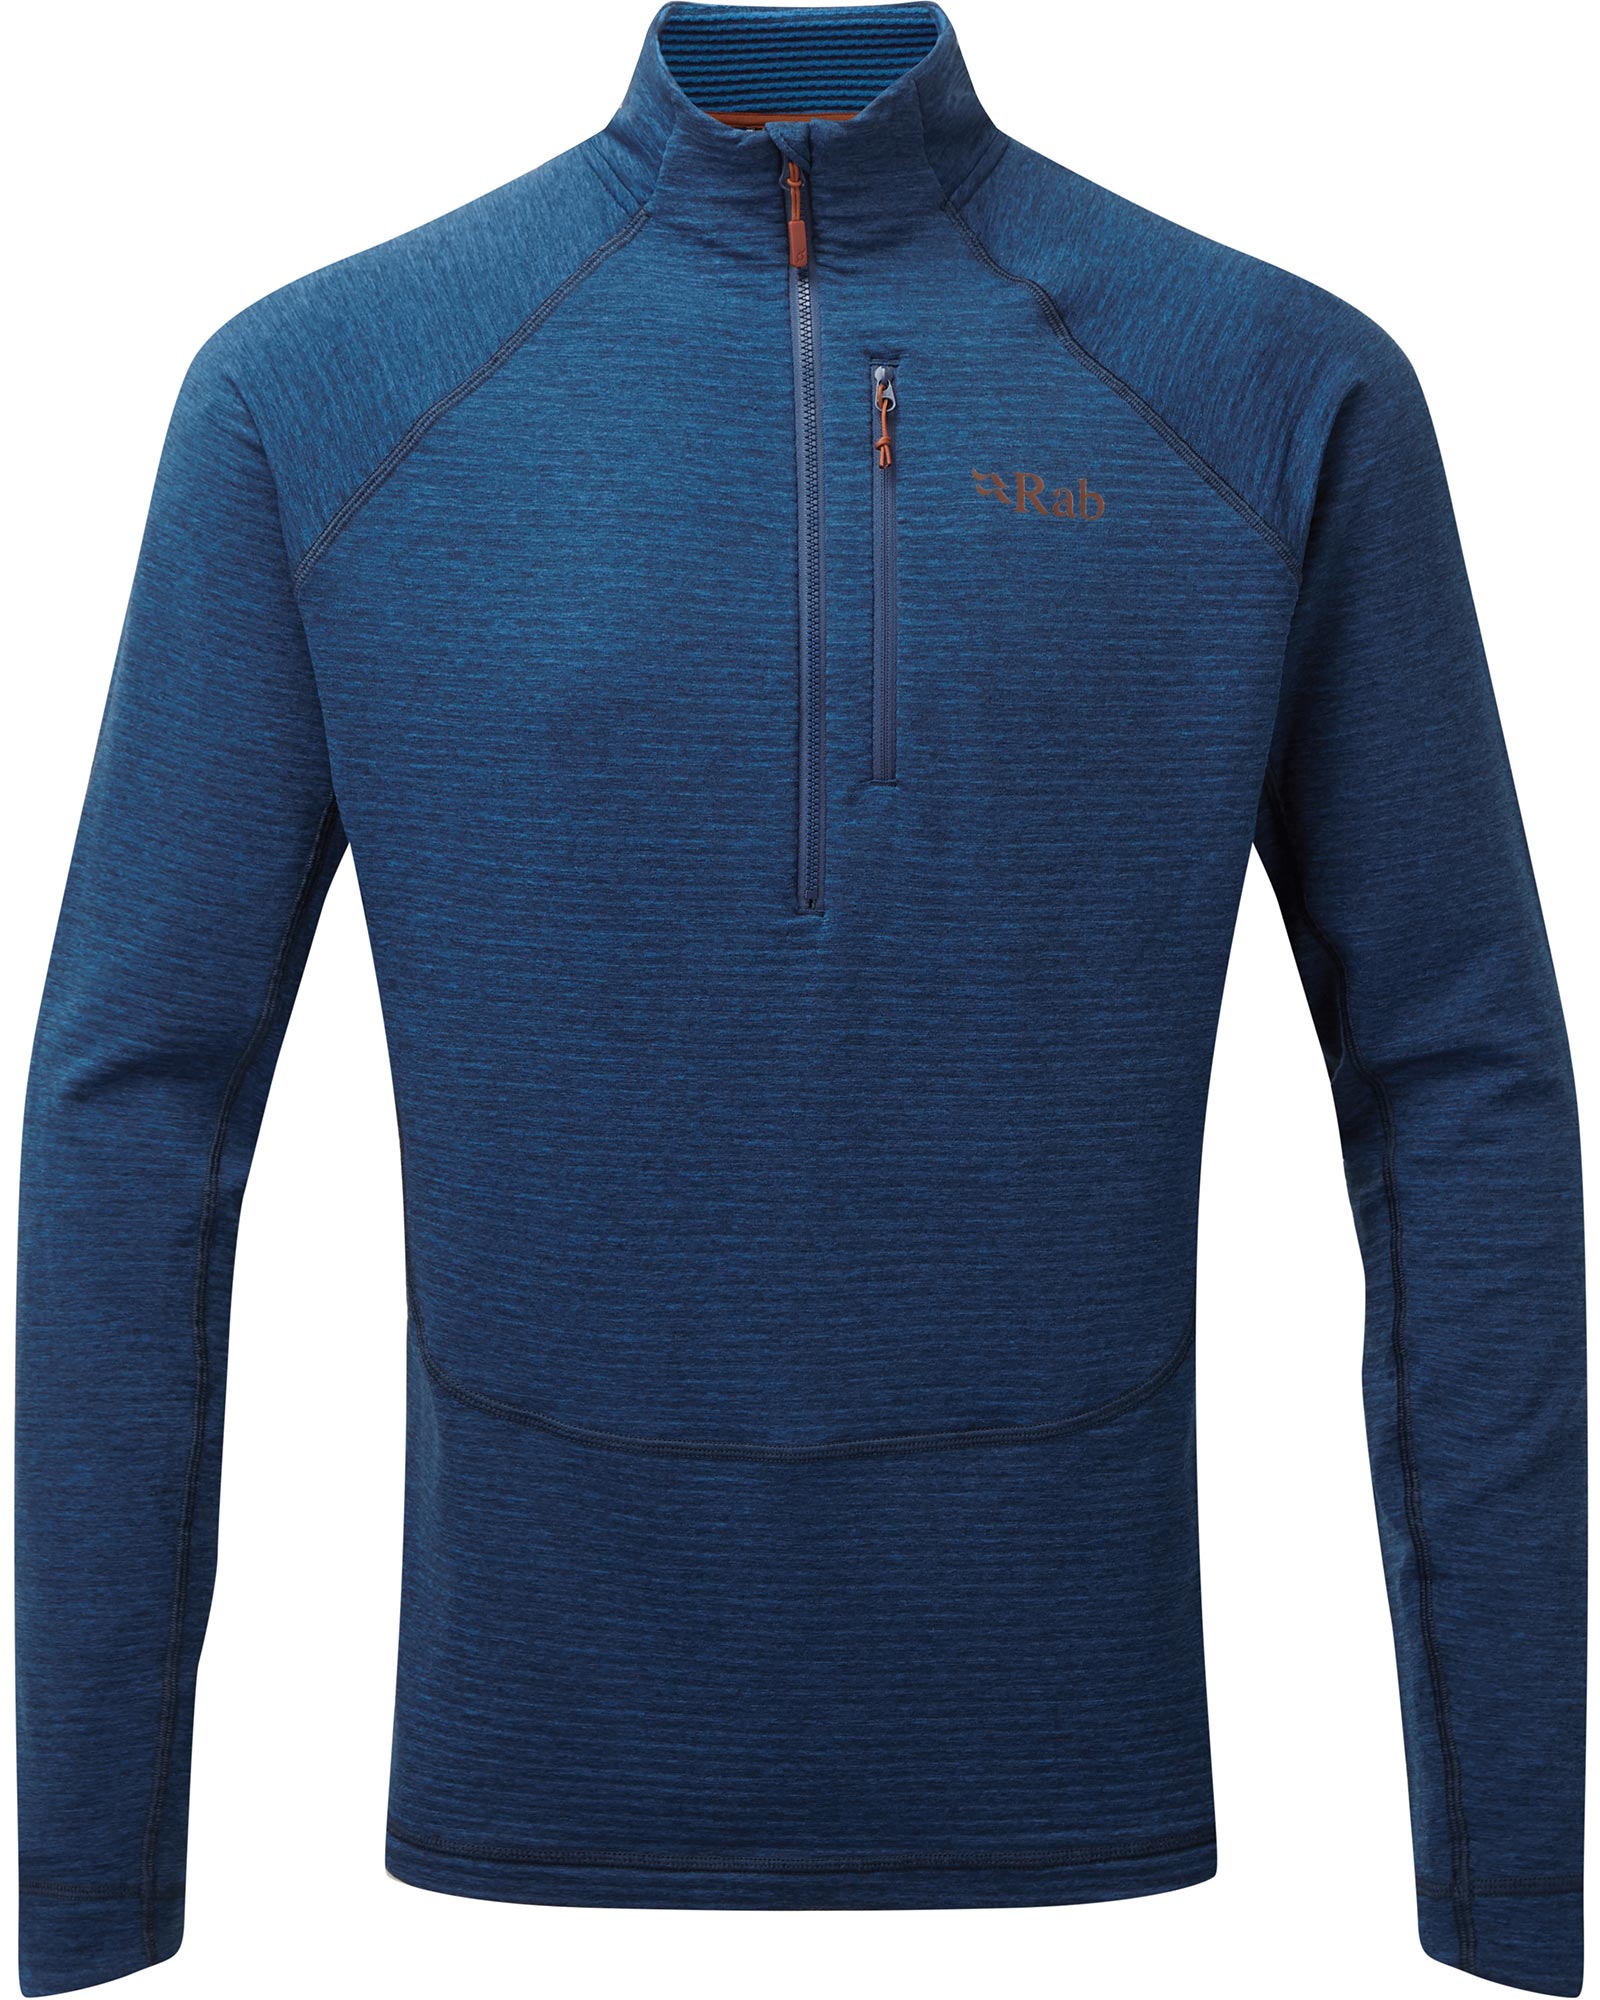 Rab Filament Men’s Pull On - Deep Ink S